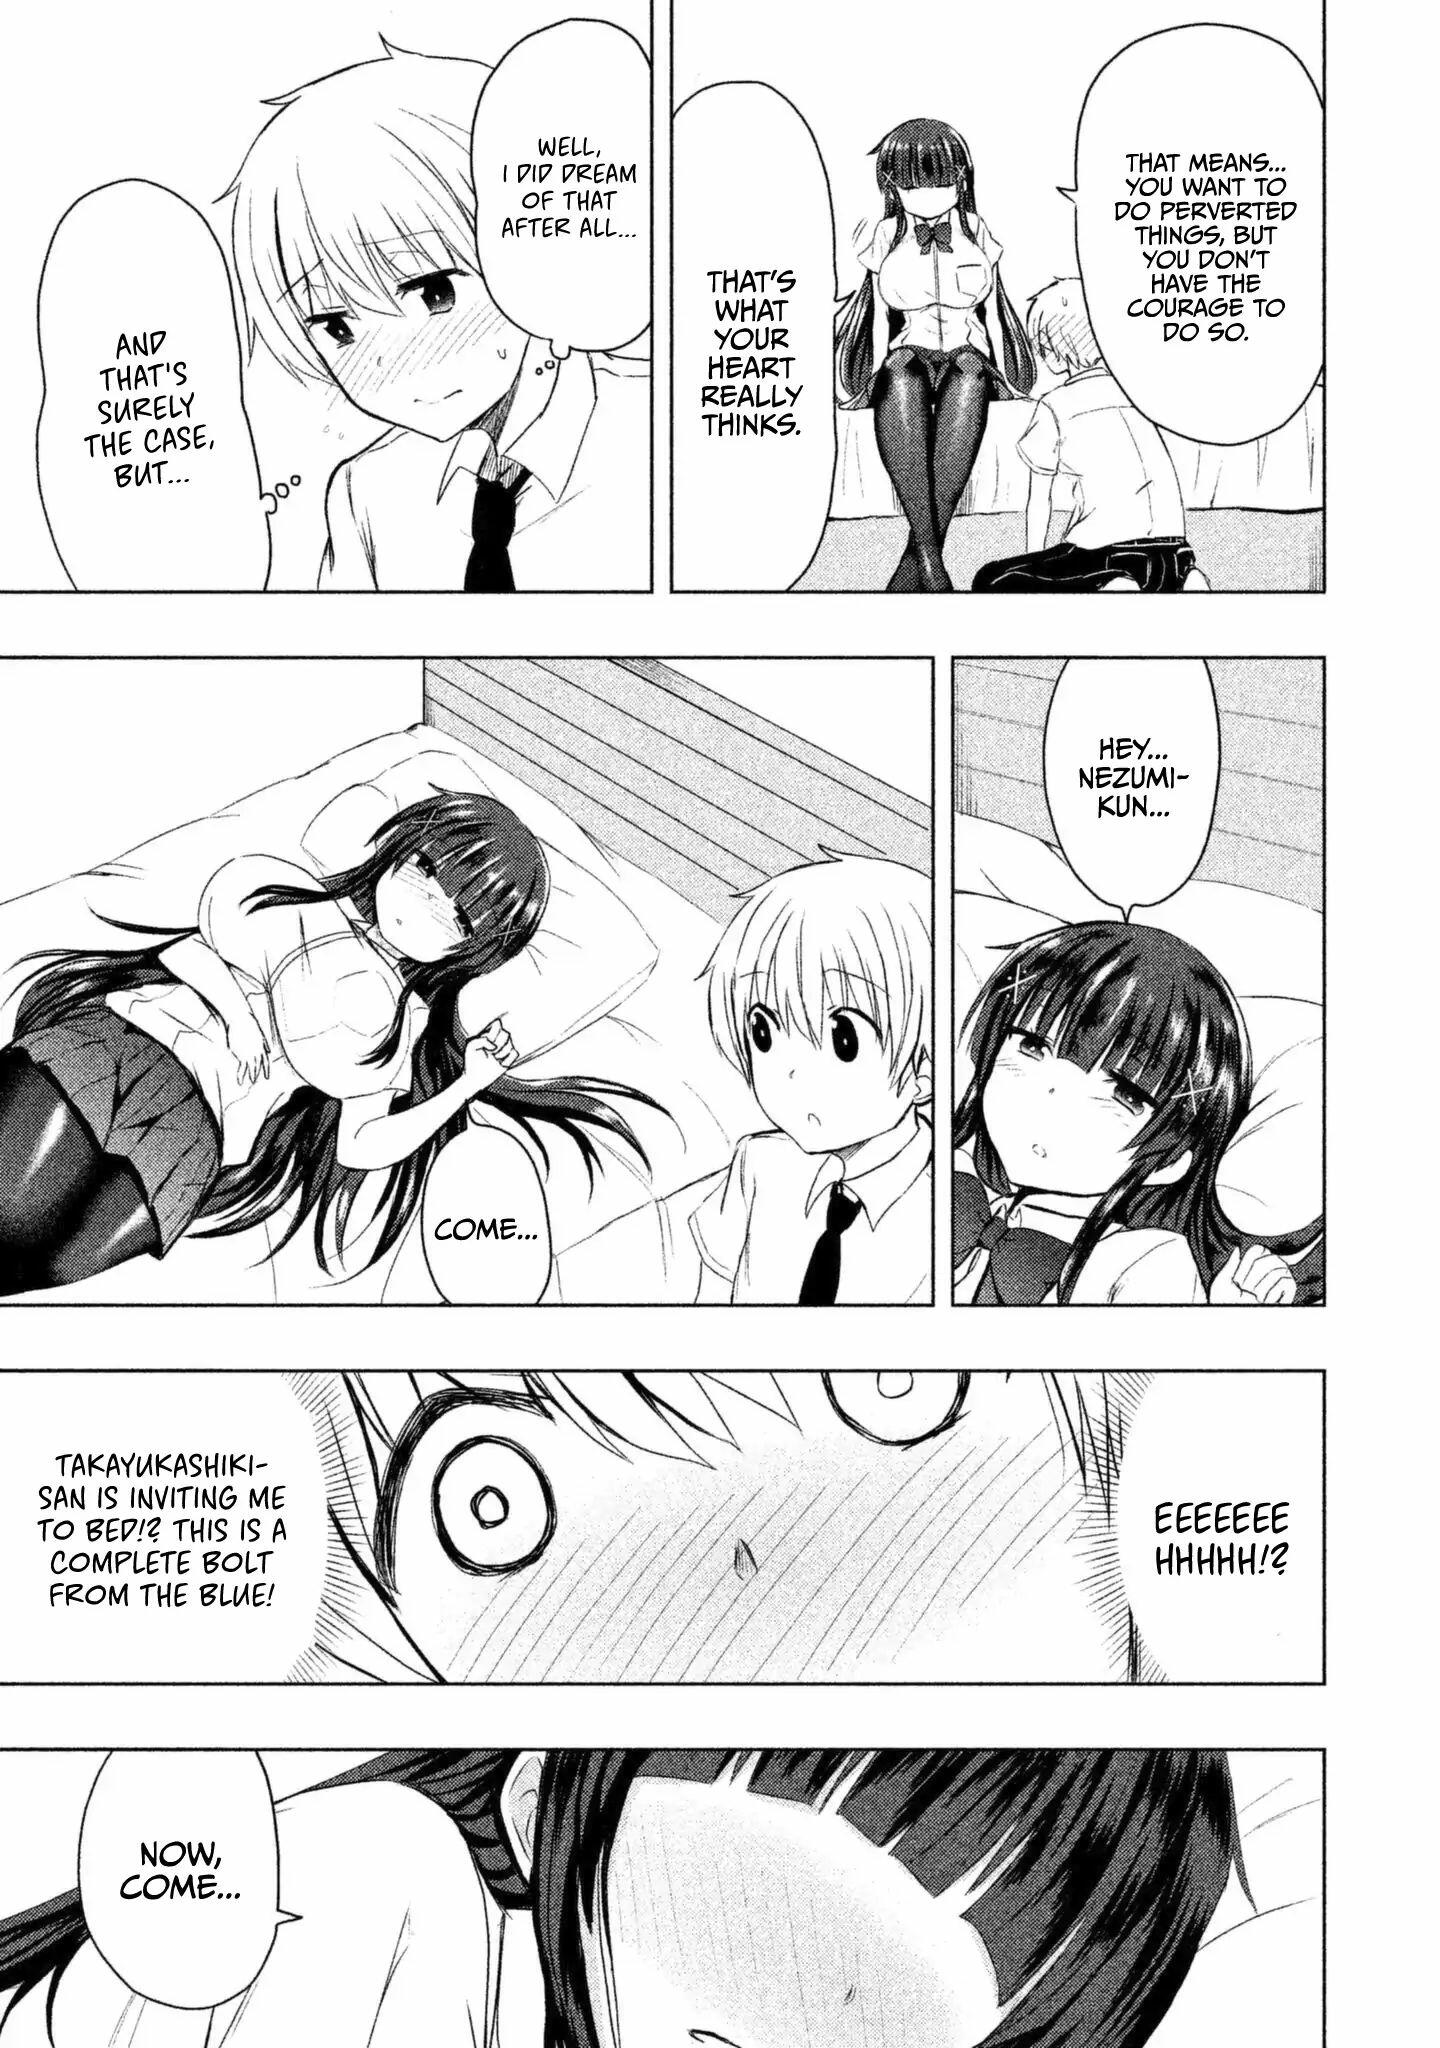 A Girl Who Is Very Well-Informed About Weird Knowledge, Takayukashiki Souko-San Vol.1 Chapter 12: Dream page 8 - Mangakakalots.com